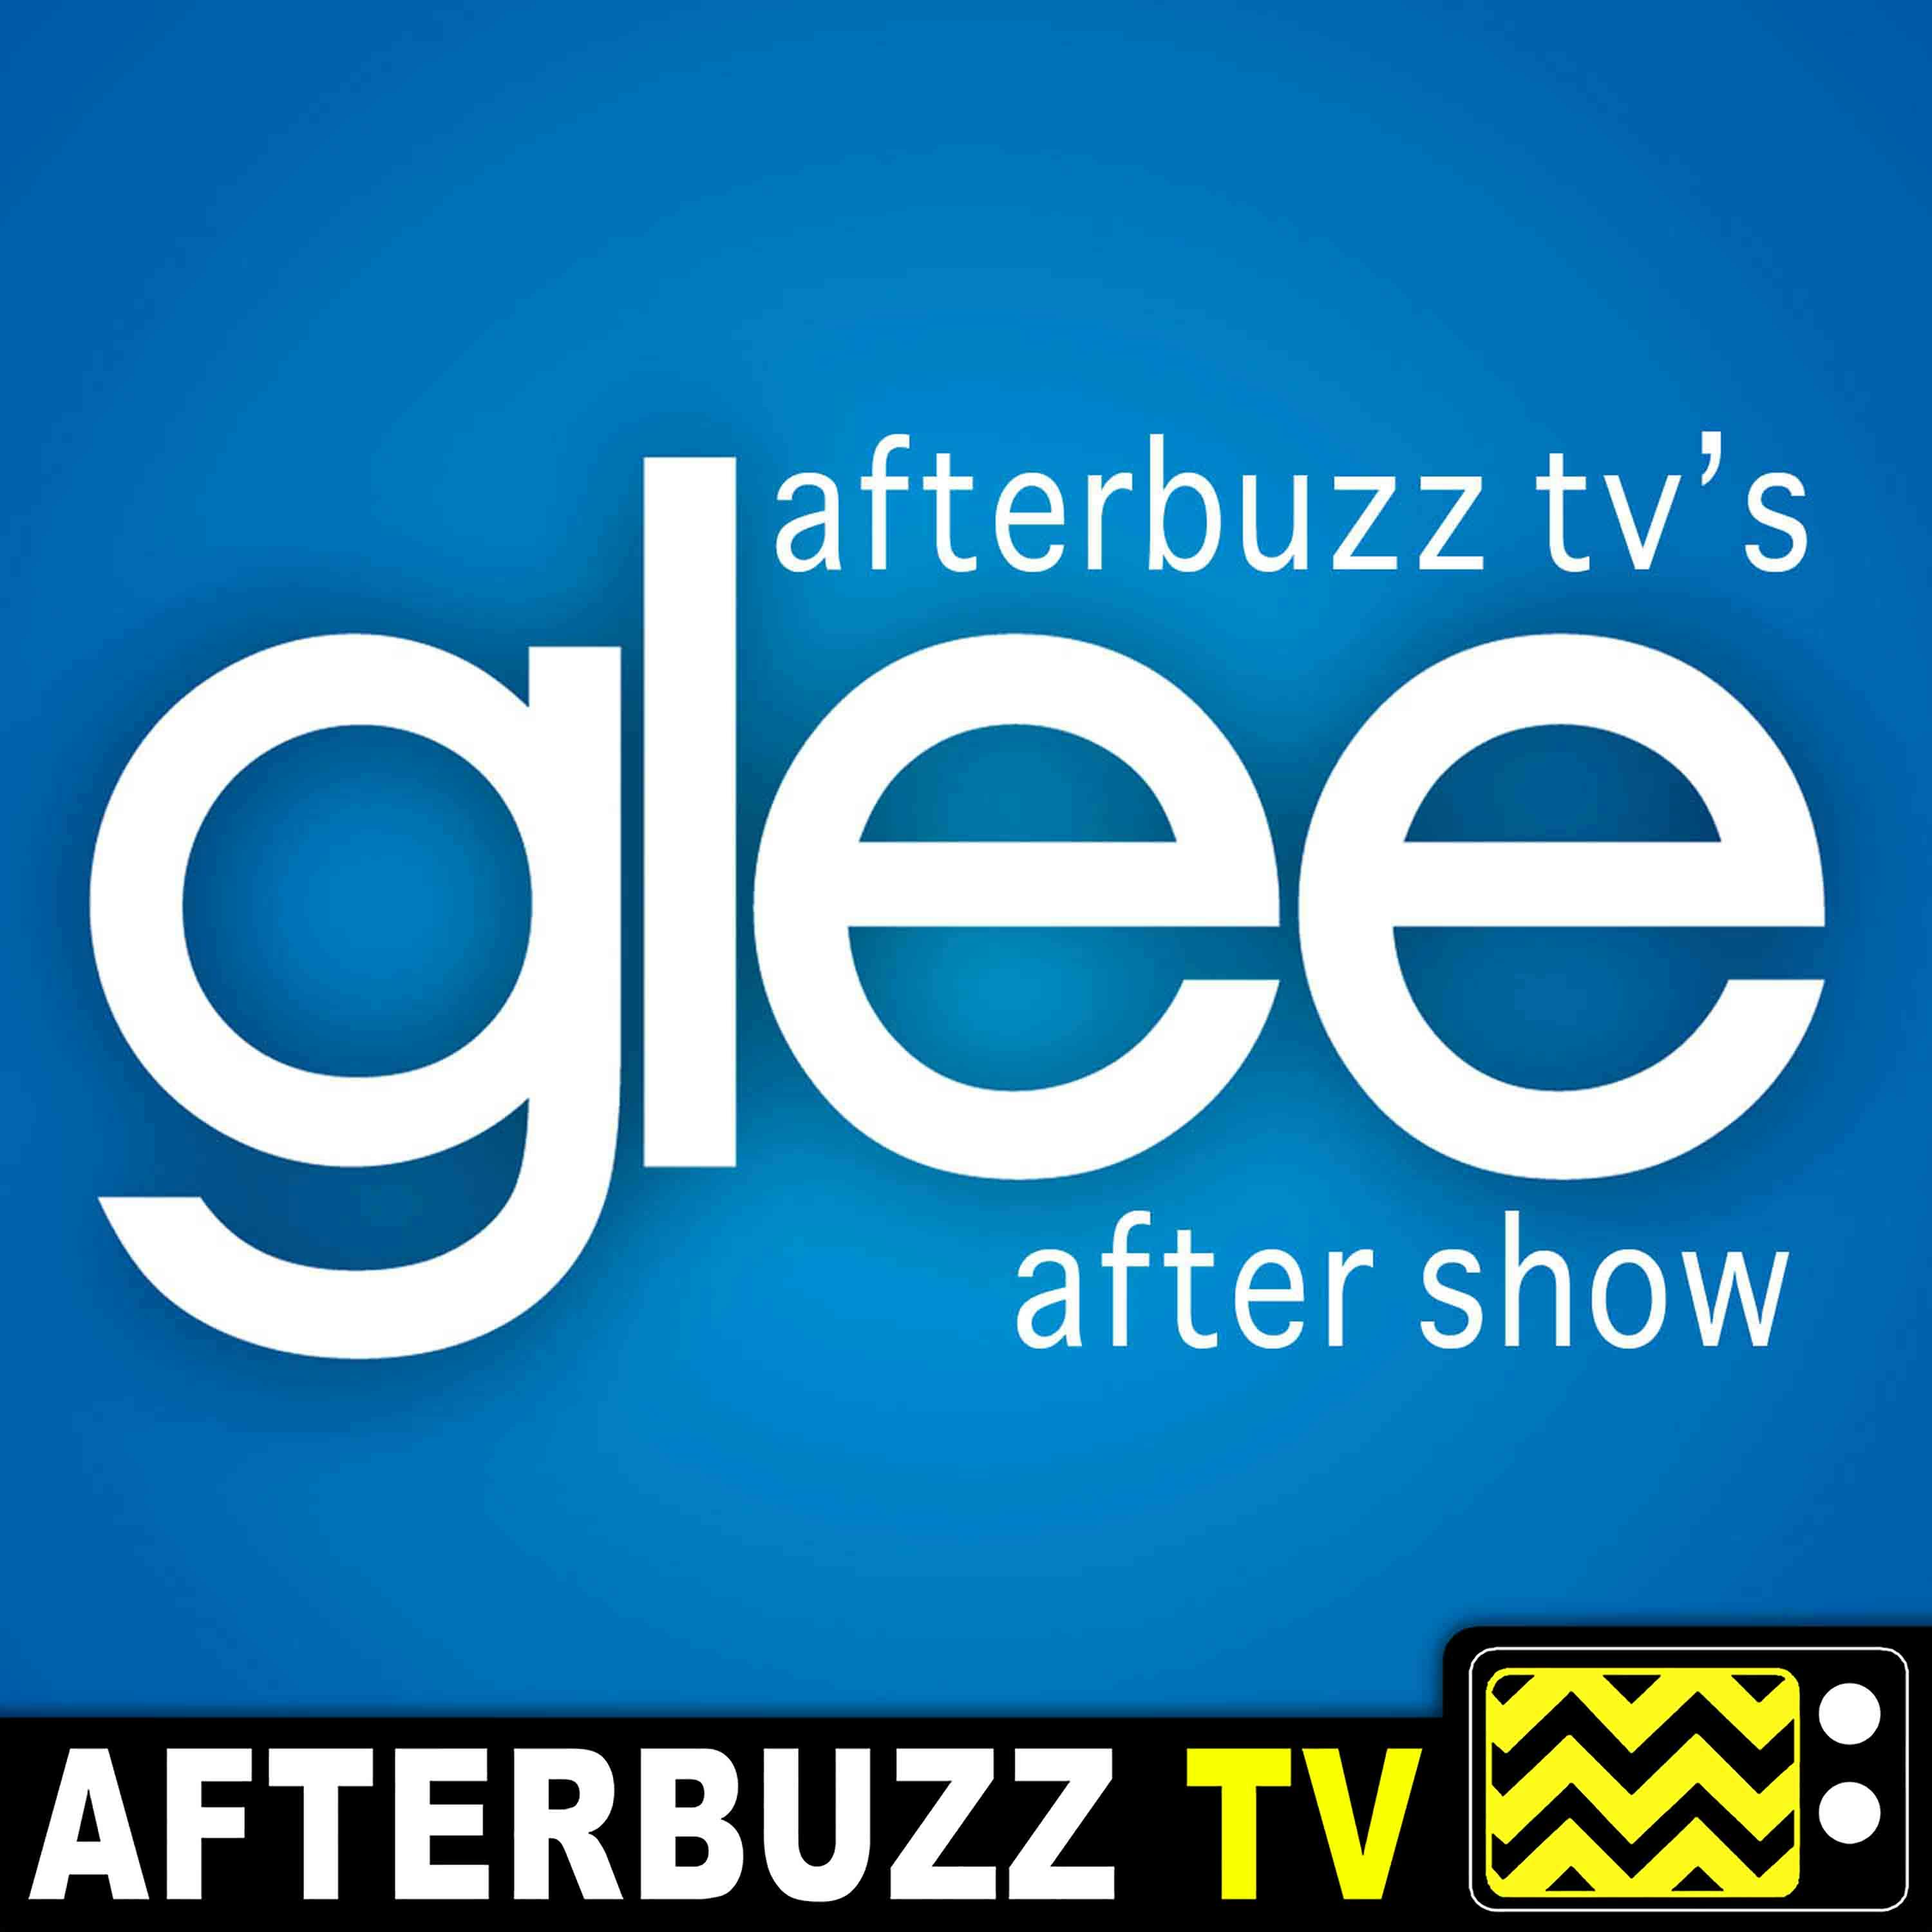 Glee S:5 | Opening Night E:17 | AfterBuzz TV AfterShow